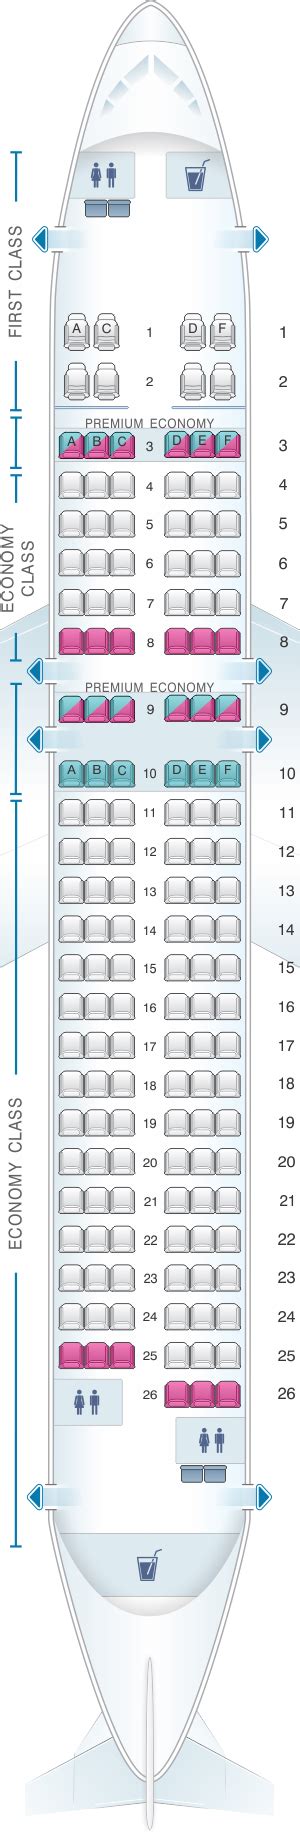 Jet Airbus A320 Seat Map